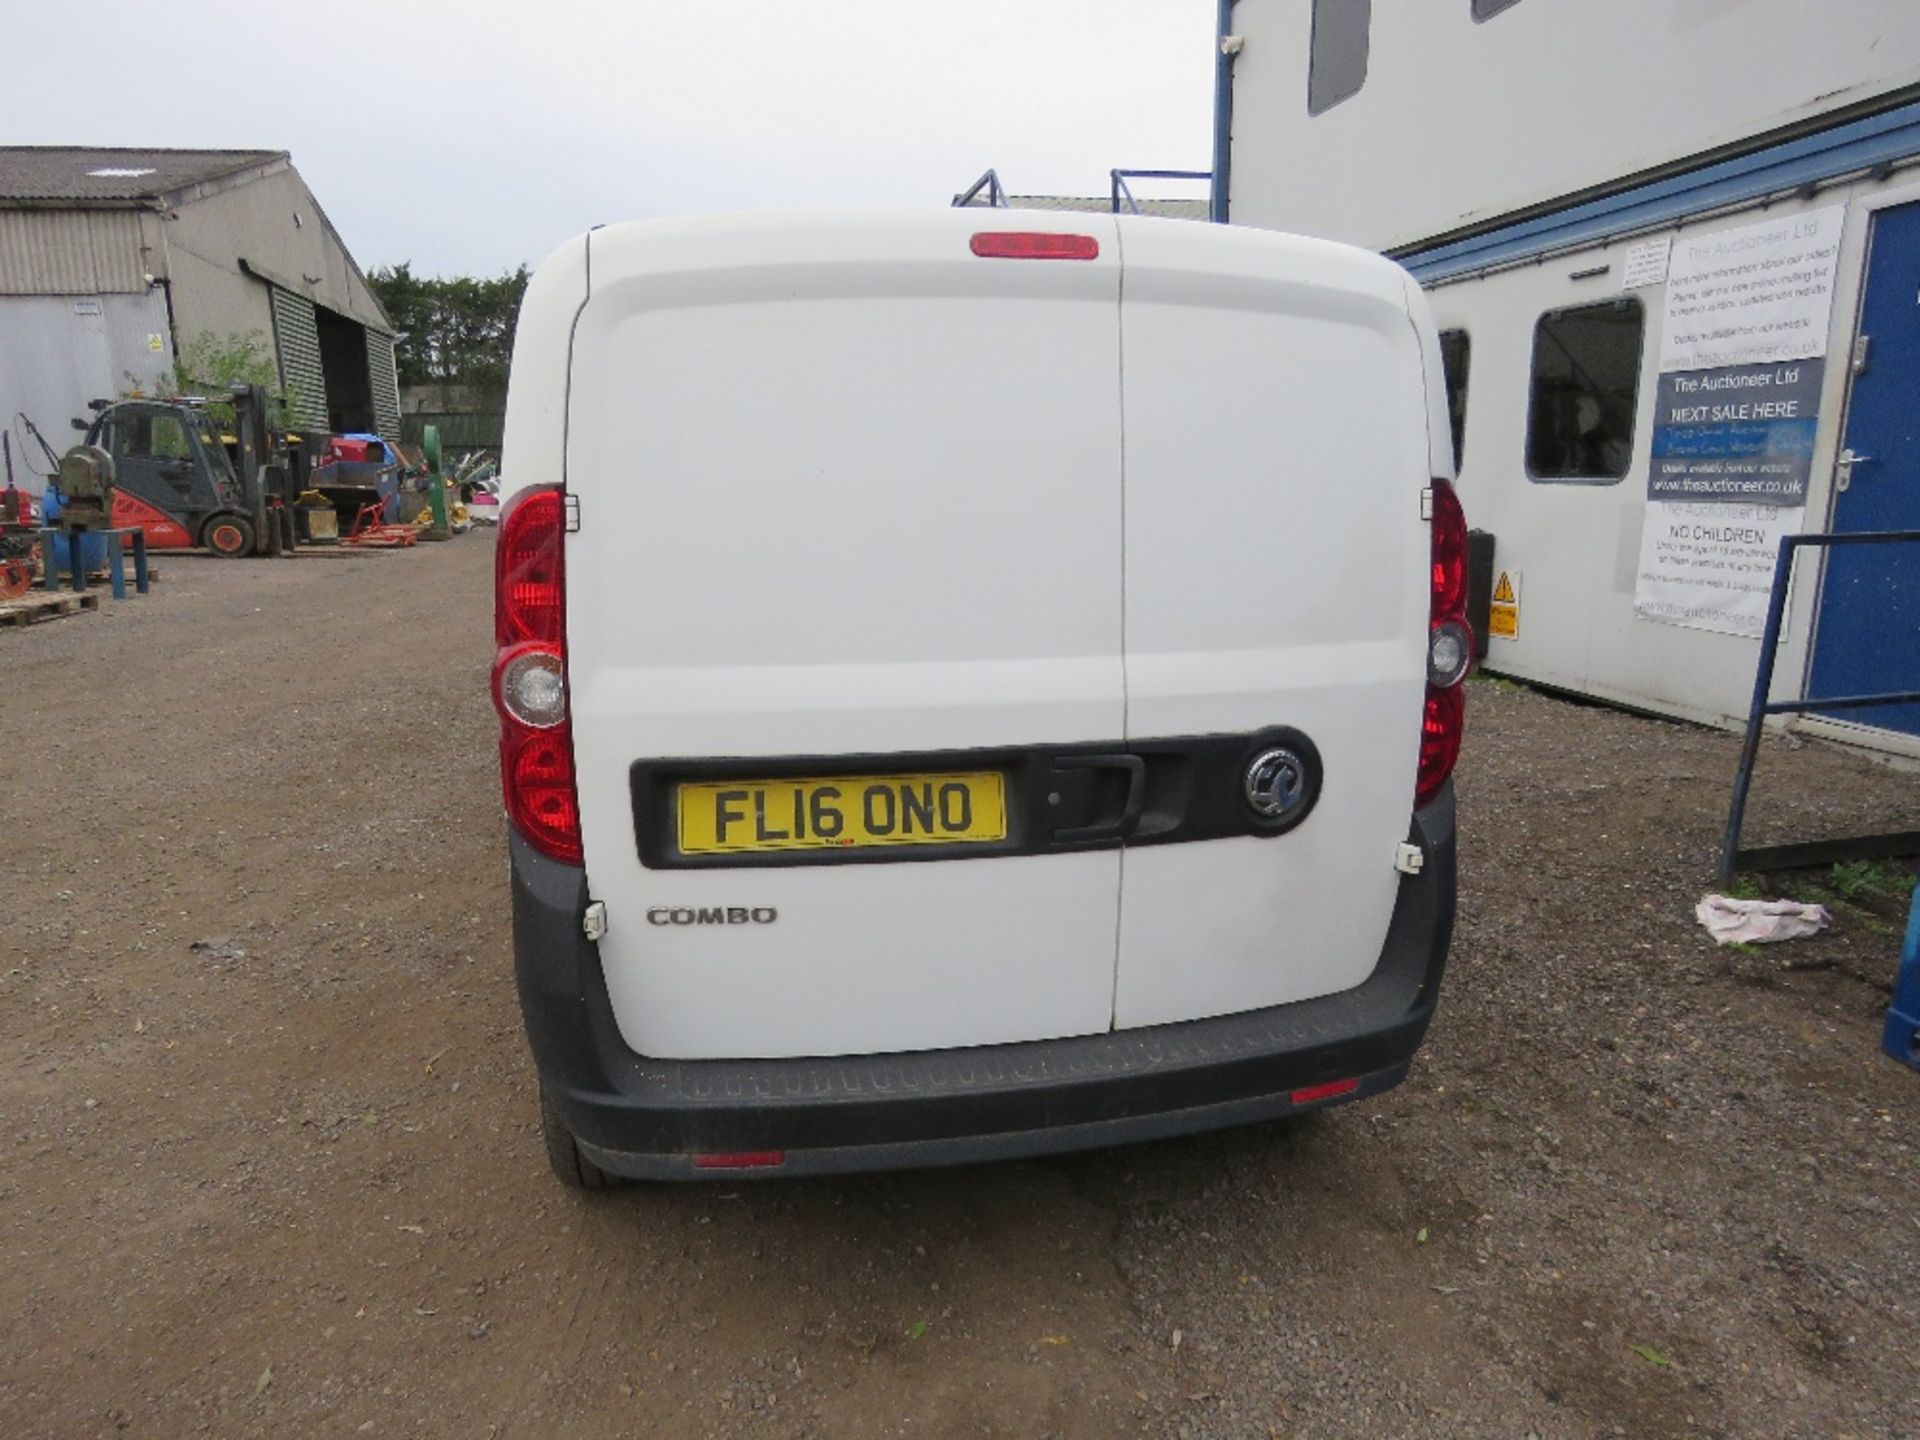 VAUXHALL COMBO L1H1-CDTI FIVE SEATER VAN REG: FL16 ONO. 98, 248 RECORDED MILES. 2 KEYS. WITH V5 (OWN - Image 4 of 21